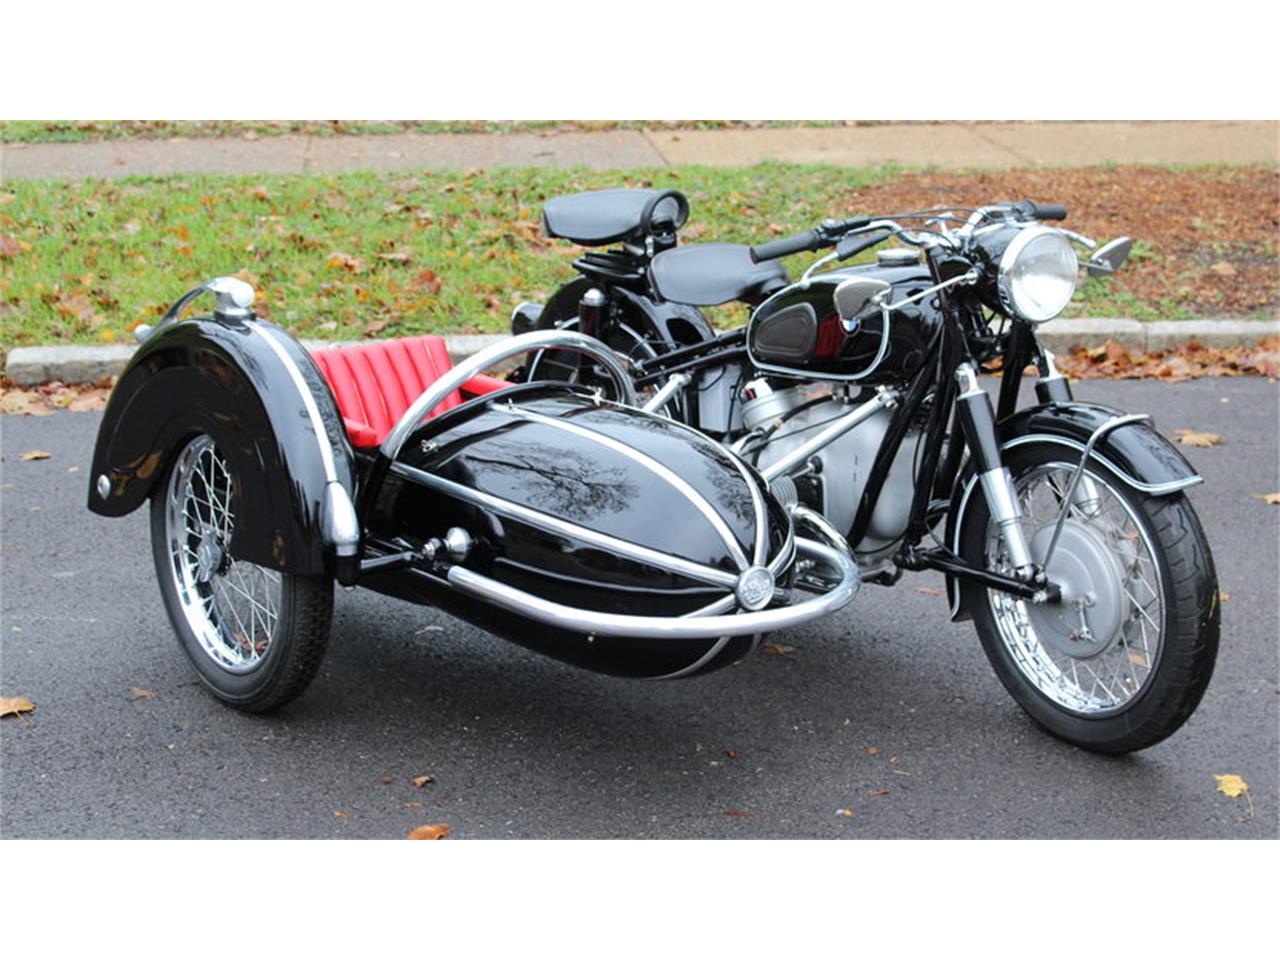 1964 BMW Motorcycle for Sale | ClassicCars.com | CC-929707